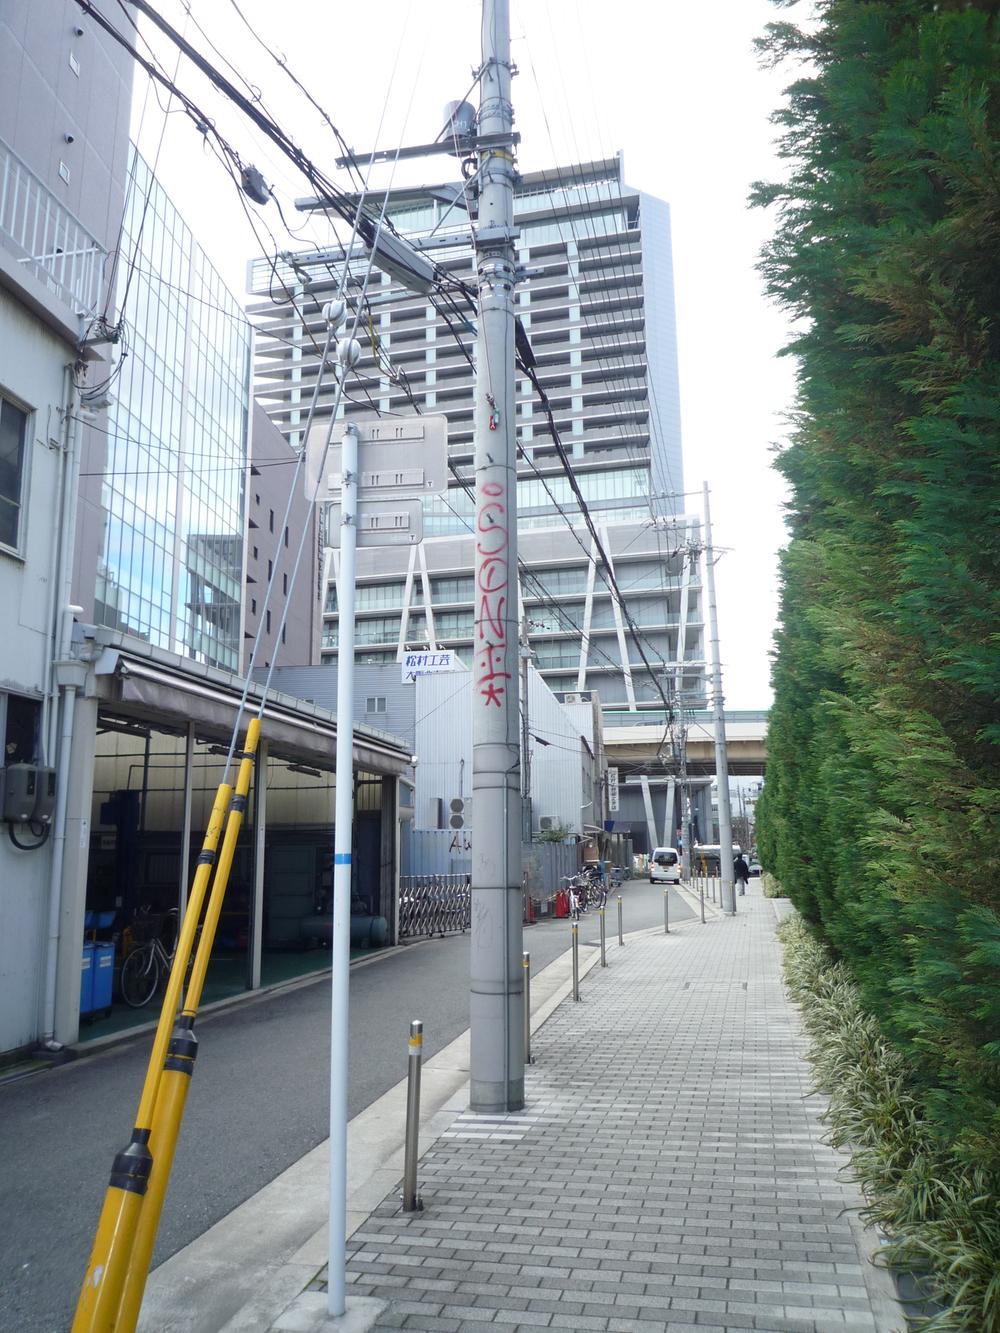 Local appearance photo. The ・ Site of Umeda Tower ・ It is a road part of the south.